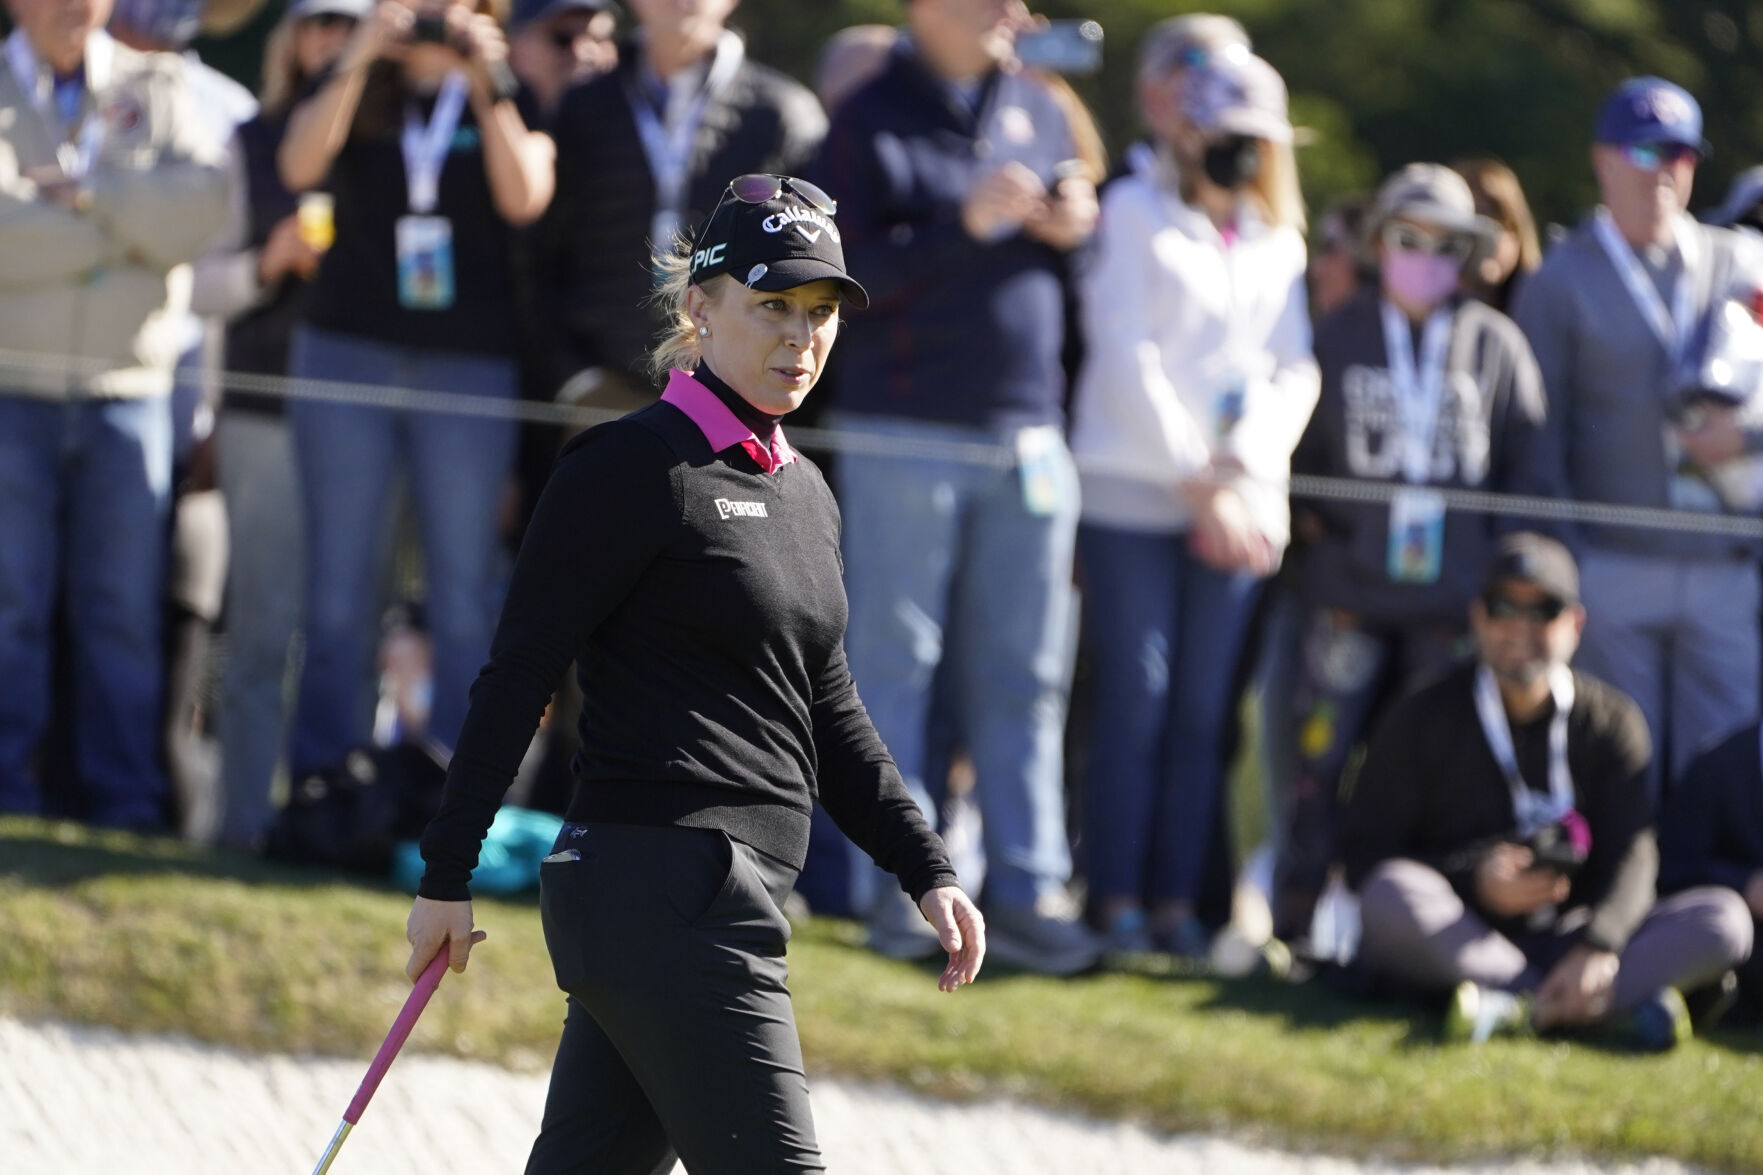 Morgan Pressel makes transition from 18th green to 18th tower for